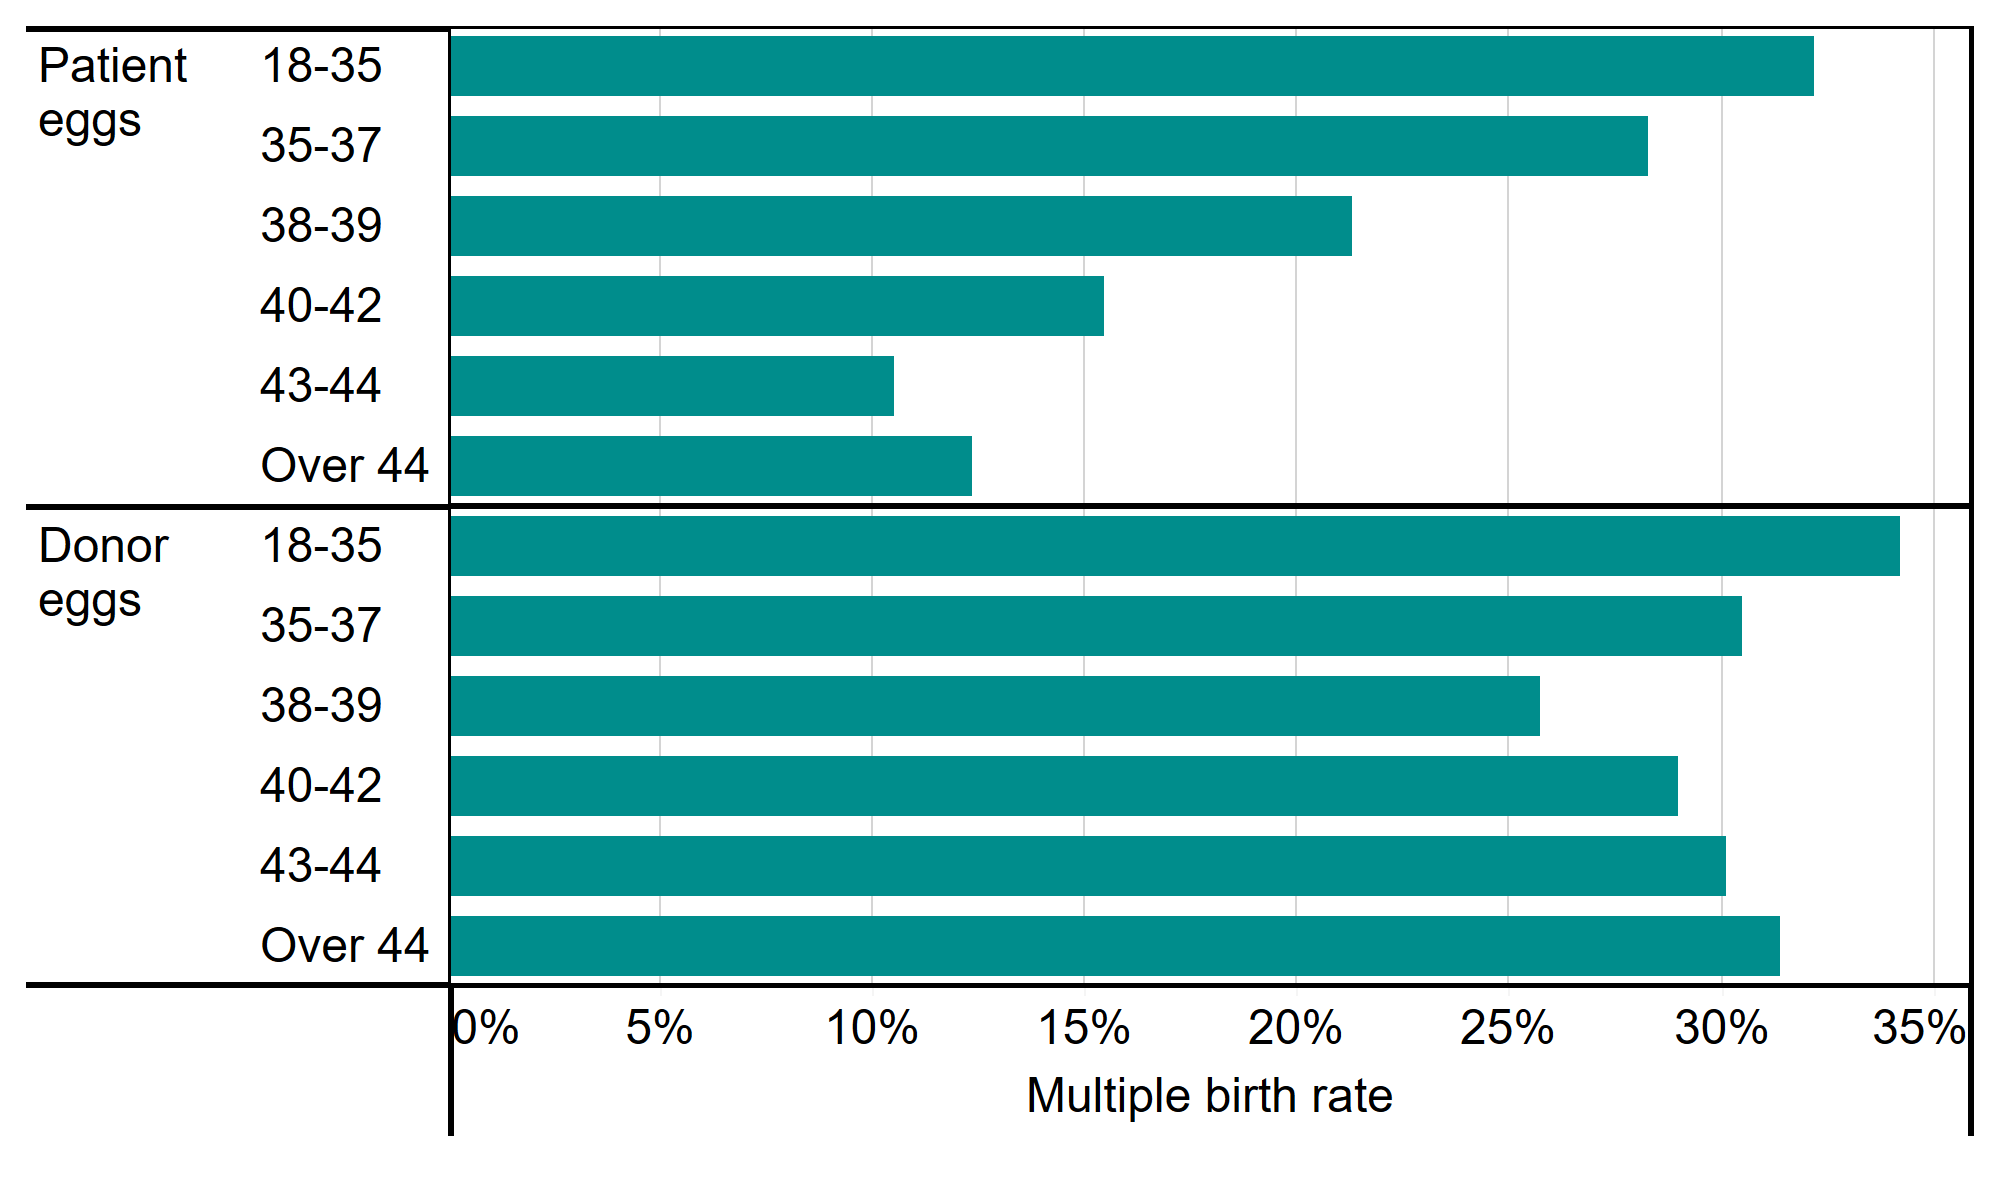 Figure 5: Average live multiple birth rate from double embryo transfers by age and egg source, 2015-2019. Average live multiple birth rate from double embryo transfers by age and egg source, 2015-2019. This bar chart shows the average multiple birth rate from double embryo transfers using either patient or donor eggs, for banded age groups; 18-35,35-37,38-39,40-42,43-44, over 44, from 2015-2019. When using patient eggs the multiple birth rate decreases with age. When using donor eggs, multiple birth rate remains high. An accessible form of the underlying data for this figure can be downloaded beneath the image in .xls format.